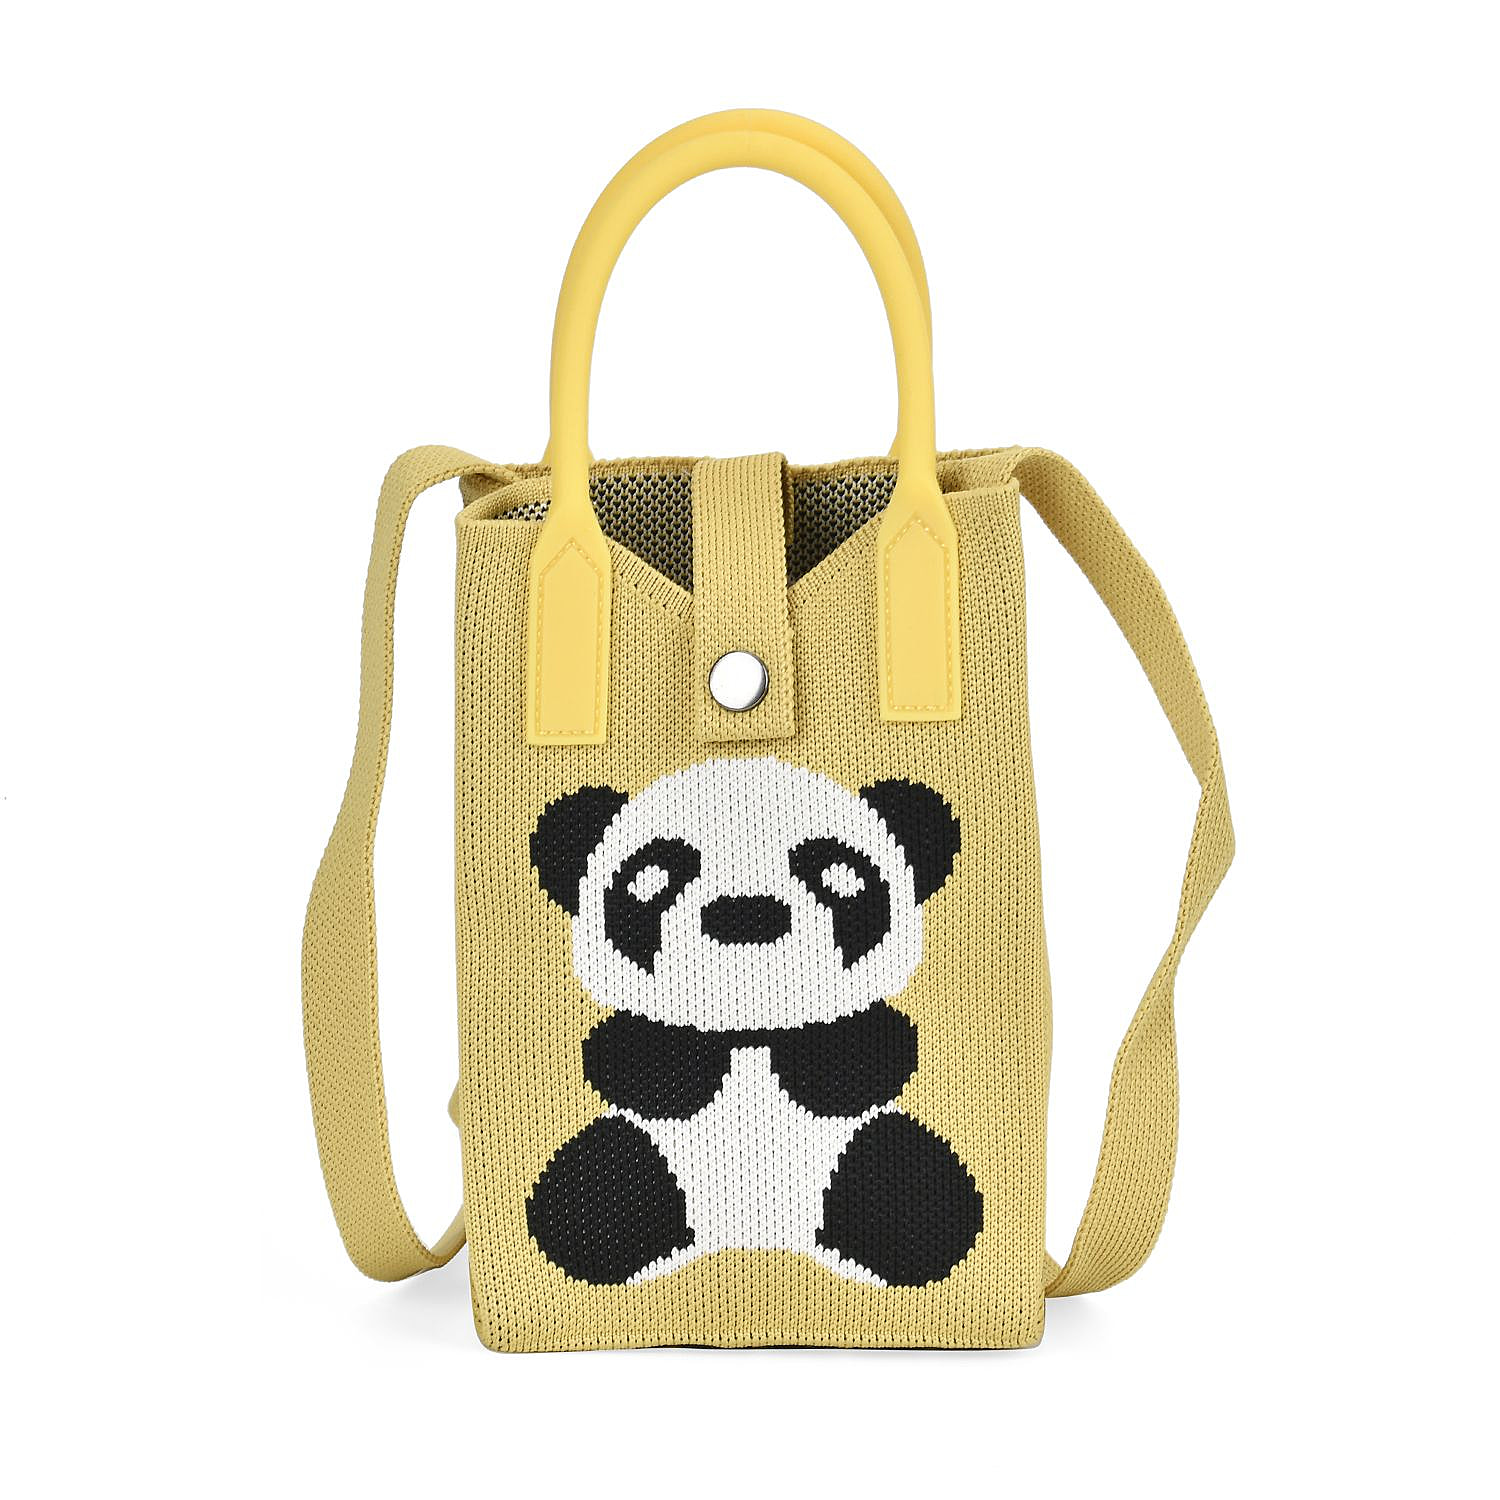 Polyester-Patterned-Crossbody-Bag-Size-11x5x16-cm-Yellow-Yellow